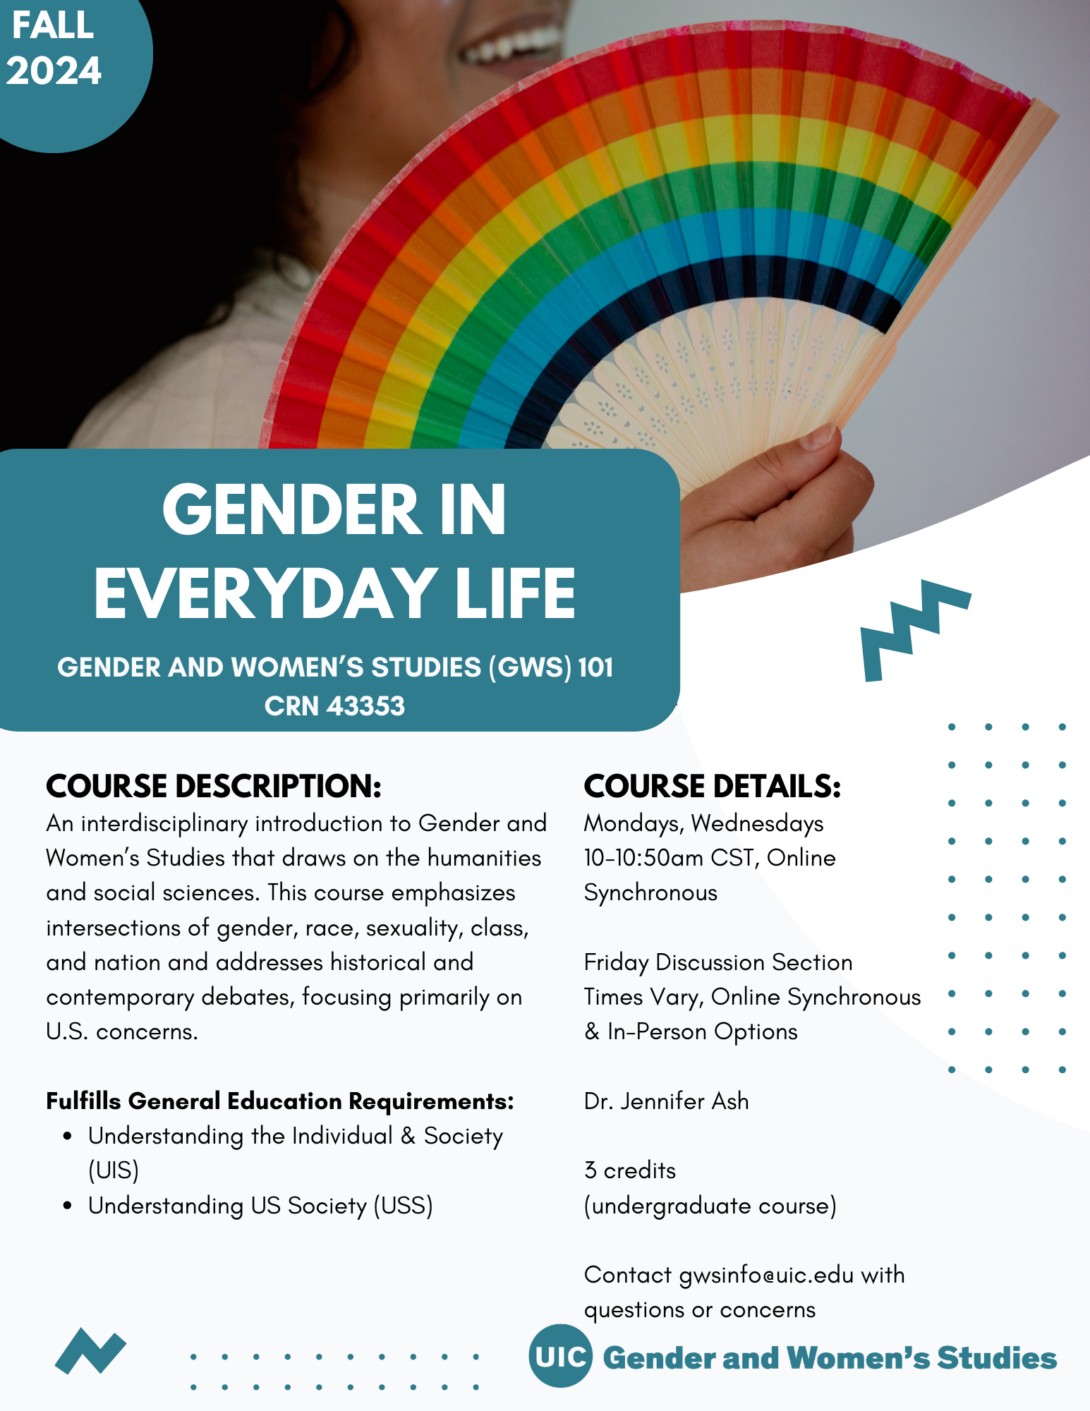 A flyer promoting the fall 2024 Gender in Everyday Life course. The top portion of the flyer includes a photo of a person holding a rainbow colored accordion flag that covers their face. In the top left corner is a teal circle with Fall 2024 inside it in white text. The bottom left portion of the photo is covered with a teal block that includes the course title in white text. Below that is the course description and course details in black text on a white background. A teal GWS logo appears in the bottom right of the flyer. Parallel lines of teal dots and teal geometric designs decorate the page.